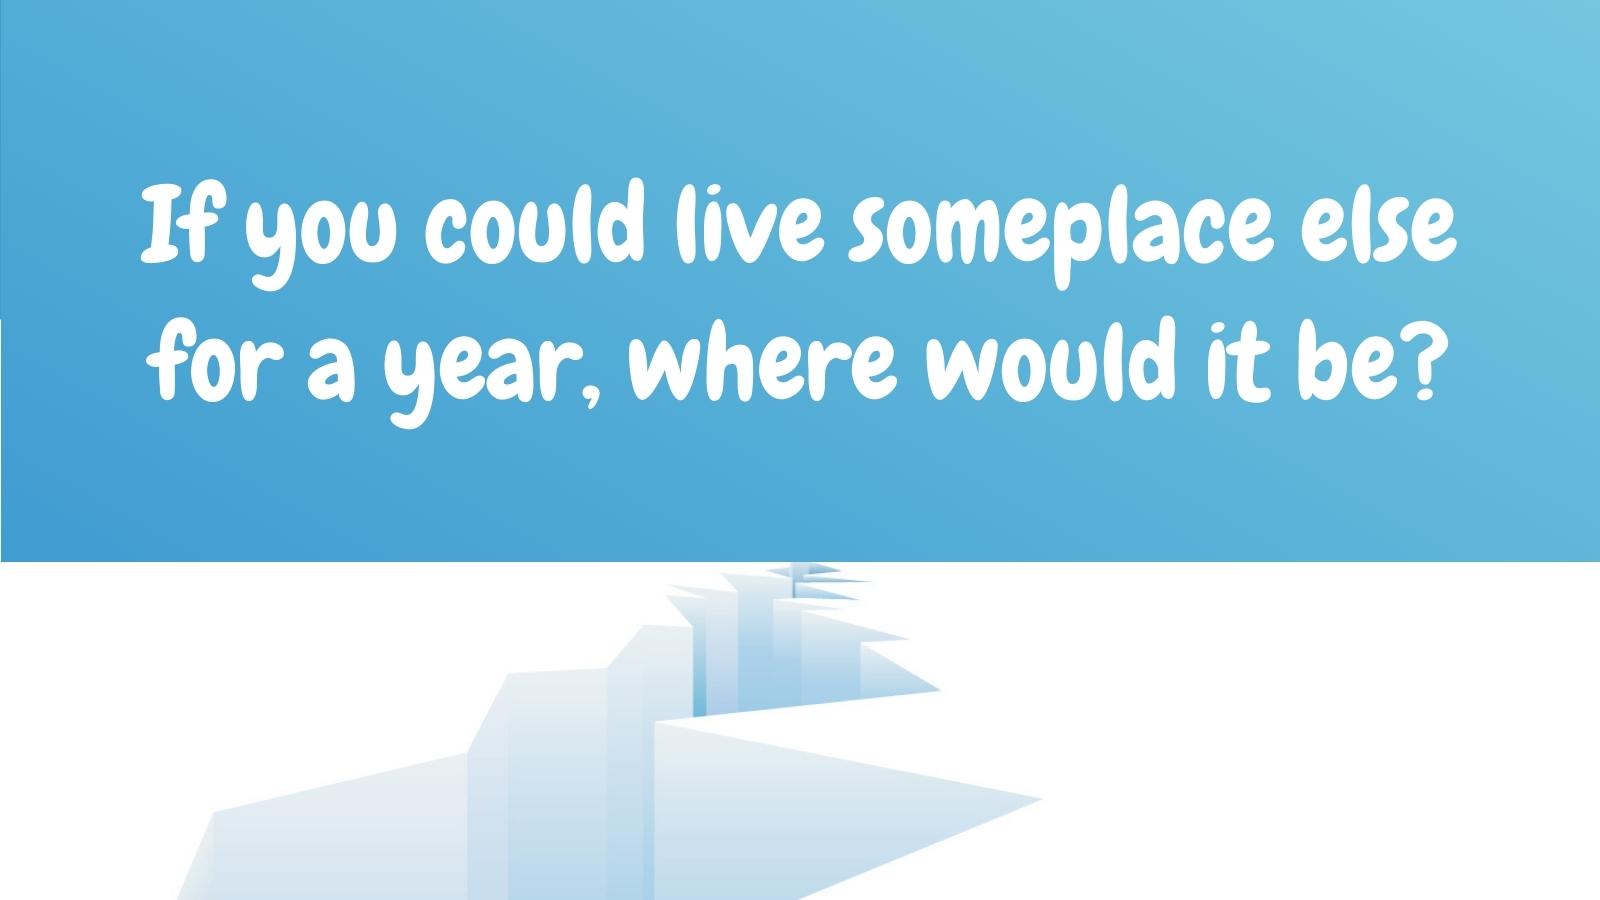 If you could live someplace else for a year, where would it be?